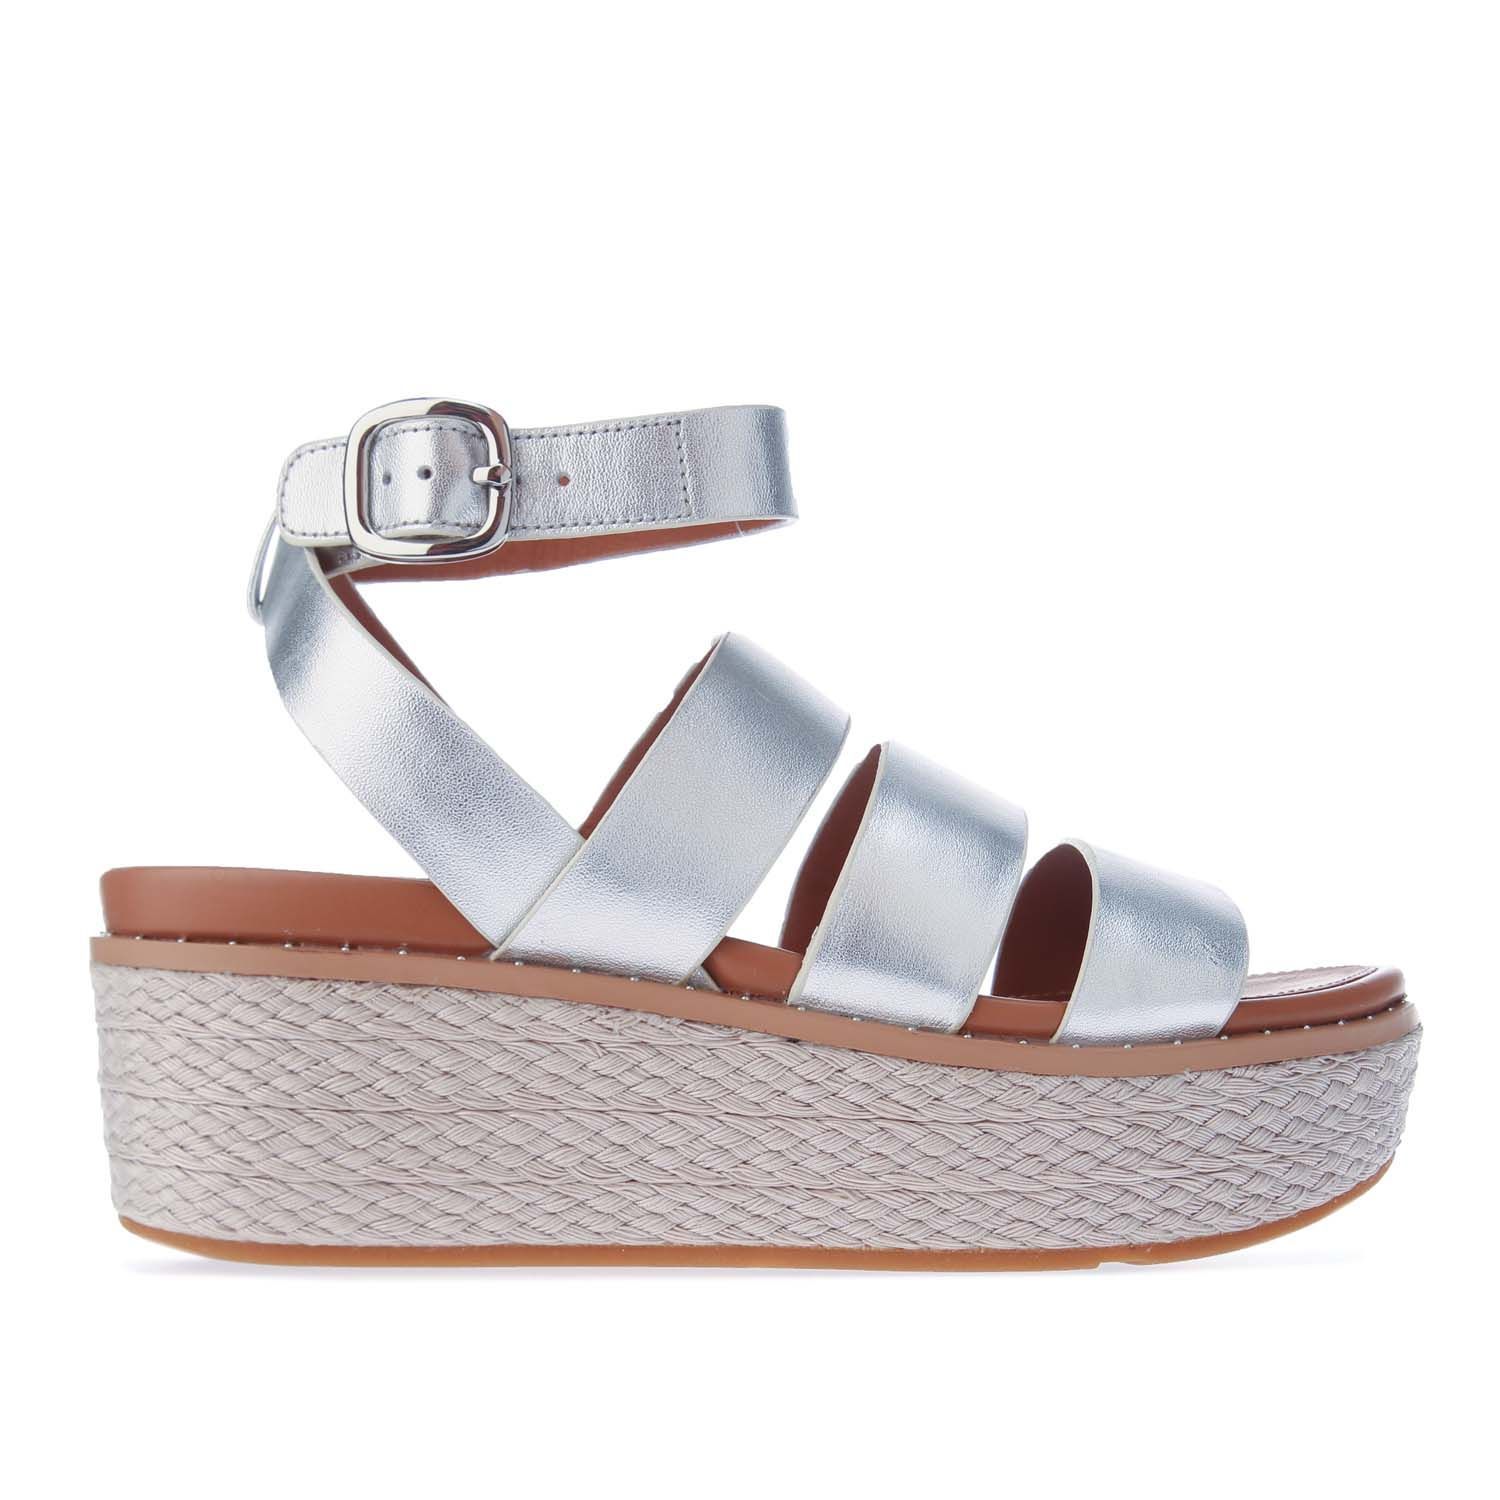 Women's Fitflop Eloise Back-Strap Espadrille Wedge Sandals in Silver